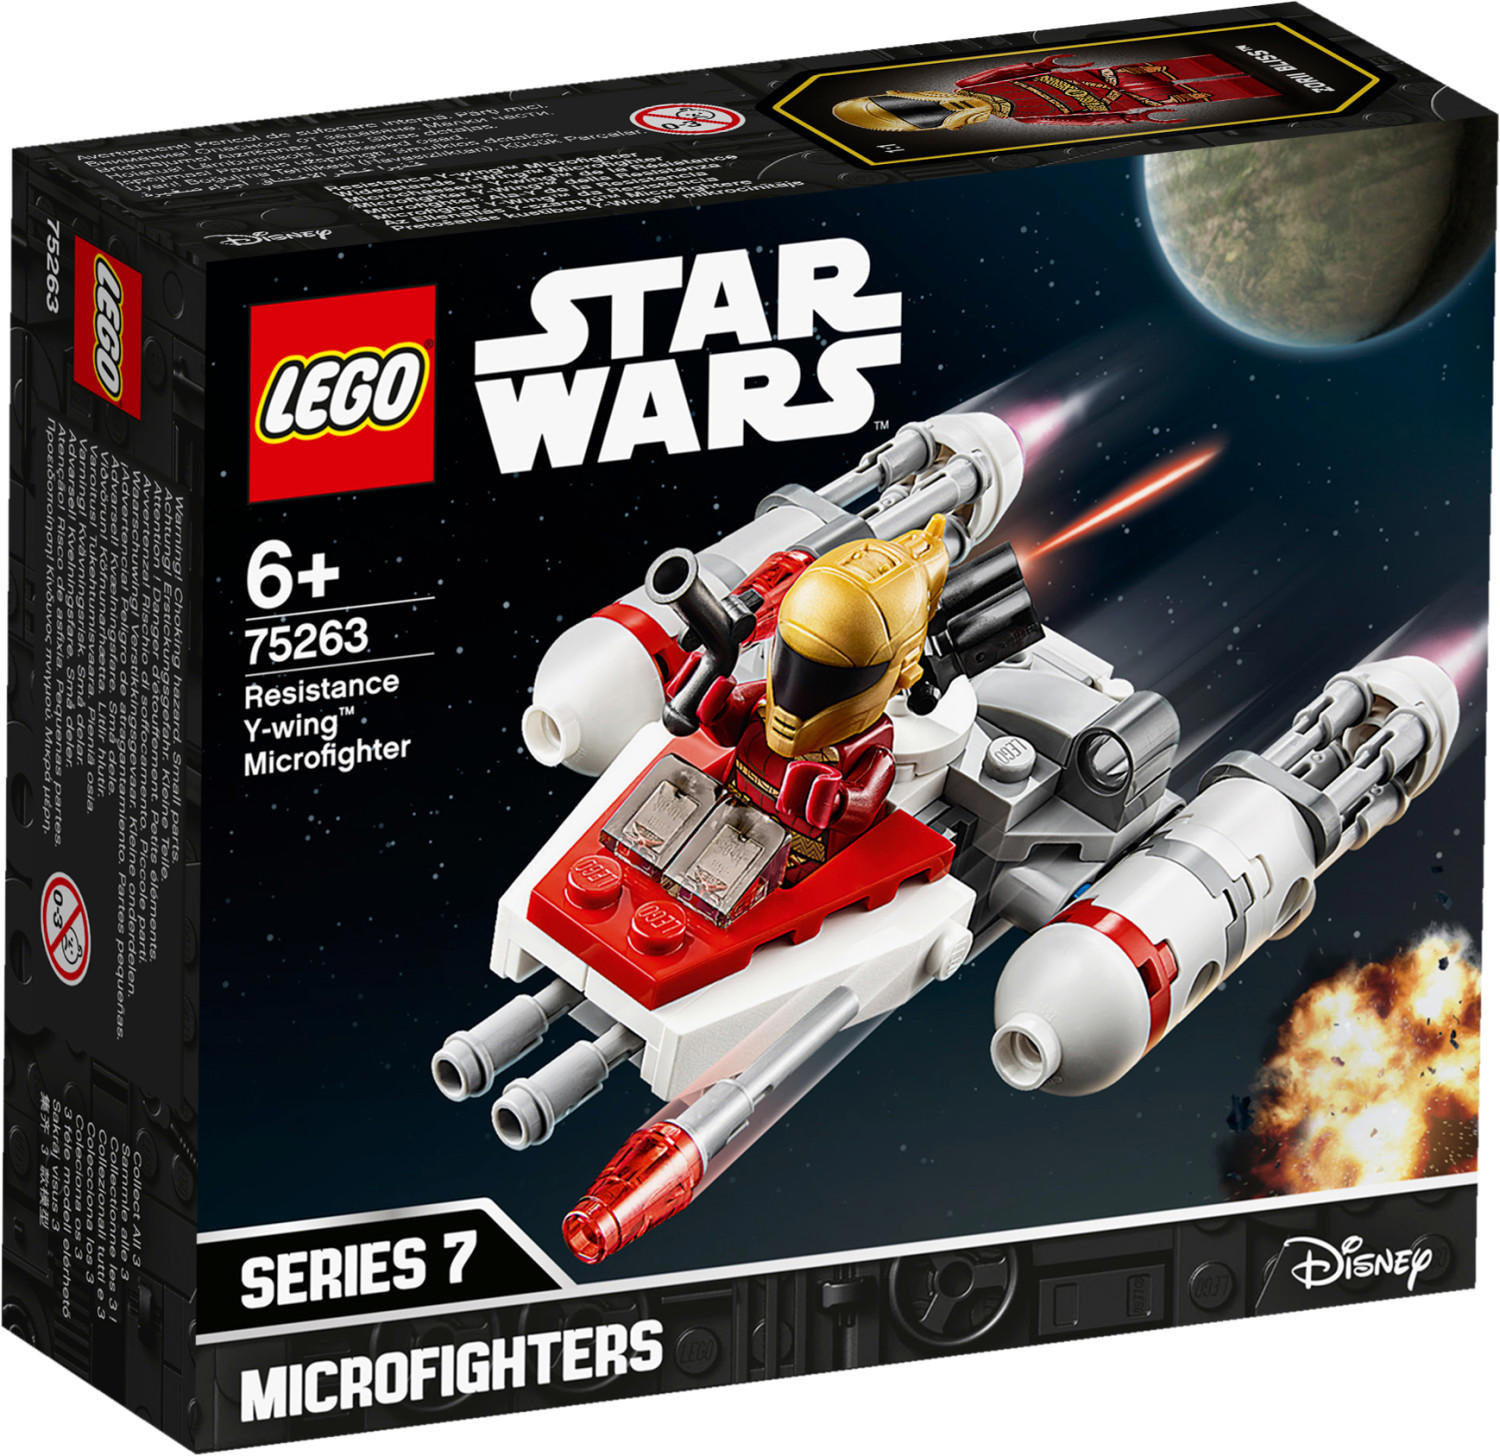 LEGO Star Wars - Resistance Y-Wing Microfighter (75263)